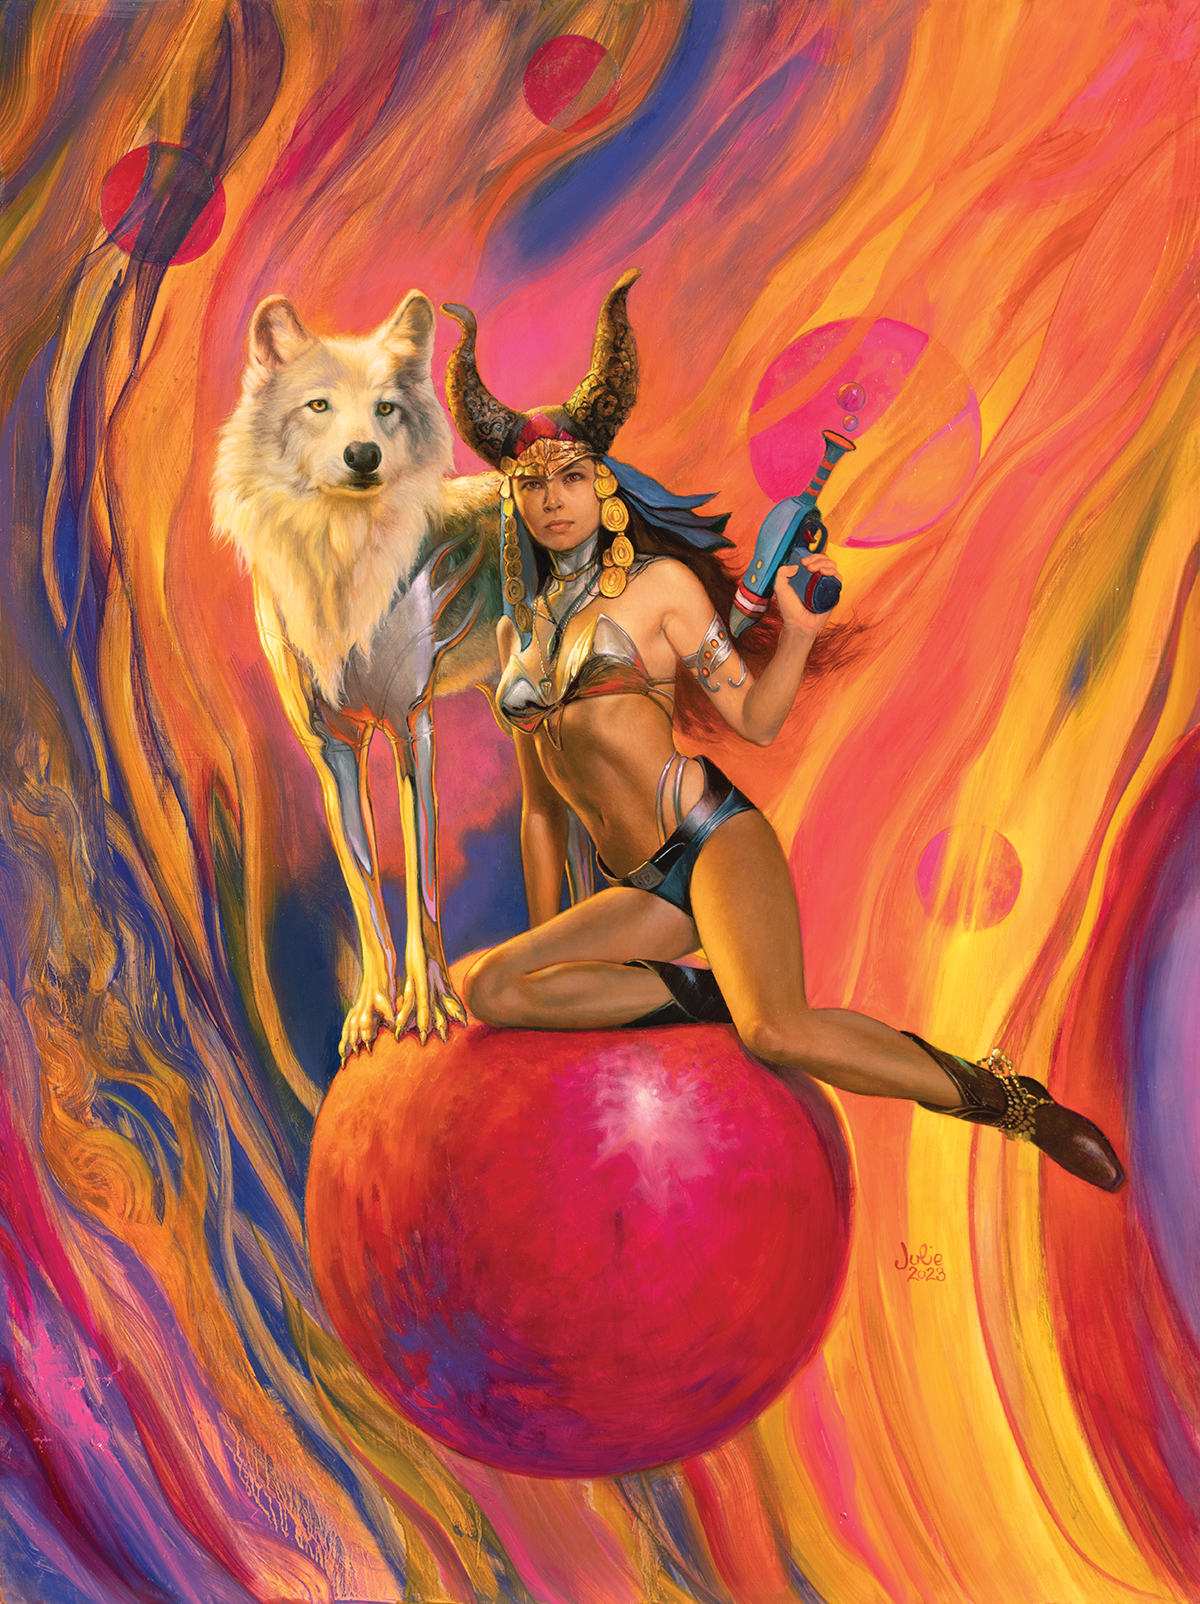 Pirate Queen riding a red bubble with a white wolf.